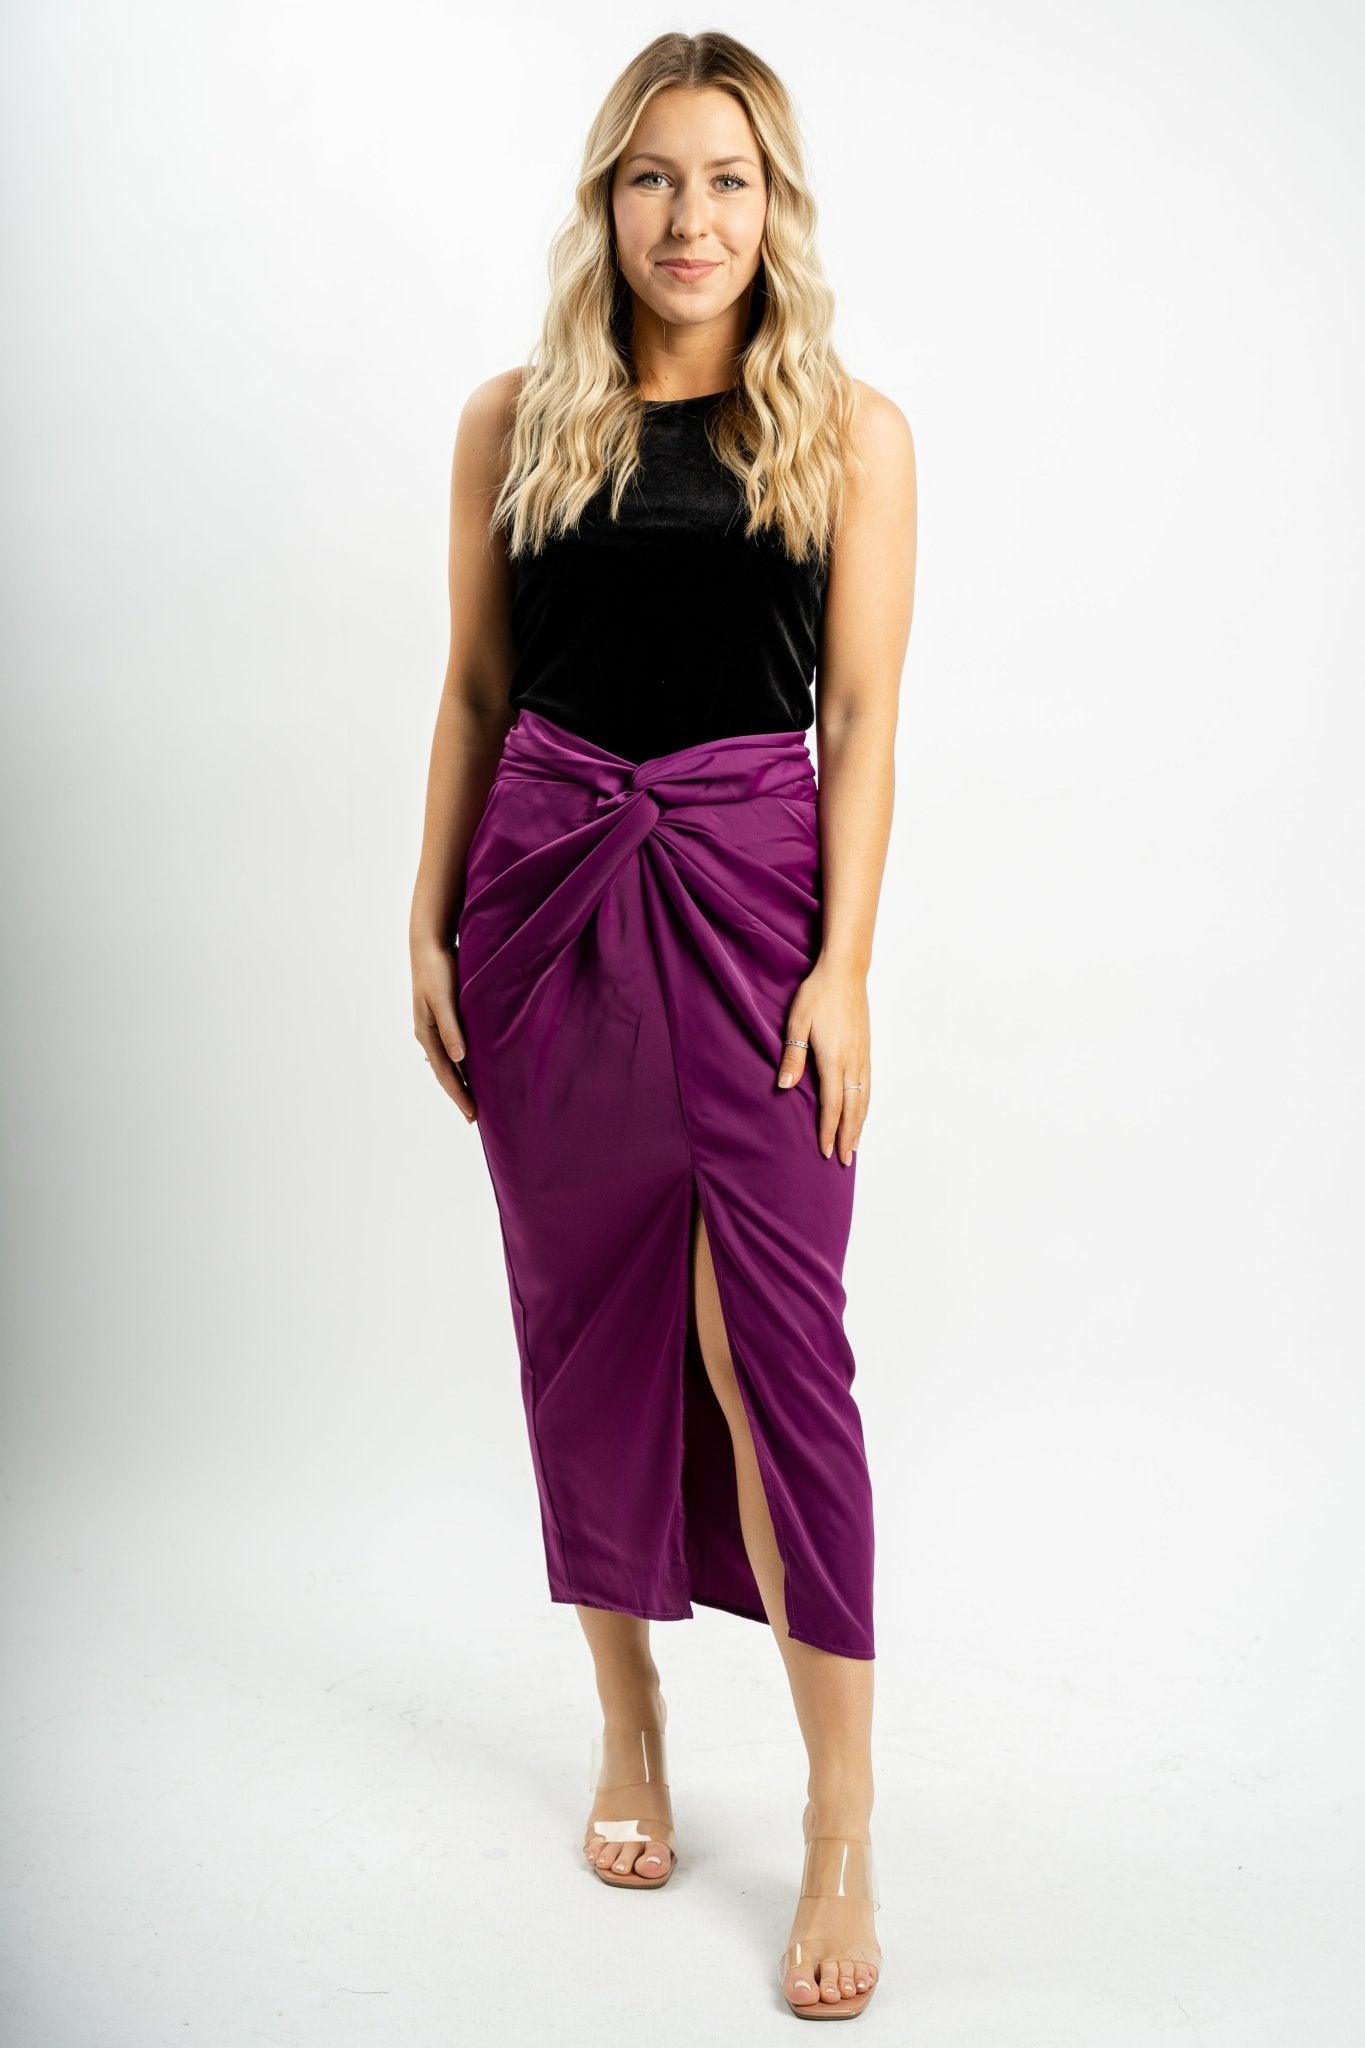 Twist waist midi skirt magenta - Affordable New Year's Eve Party Outfits at Lush Fashion Lounge Boutique in Oklahoma City